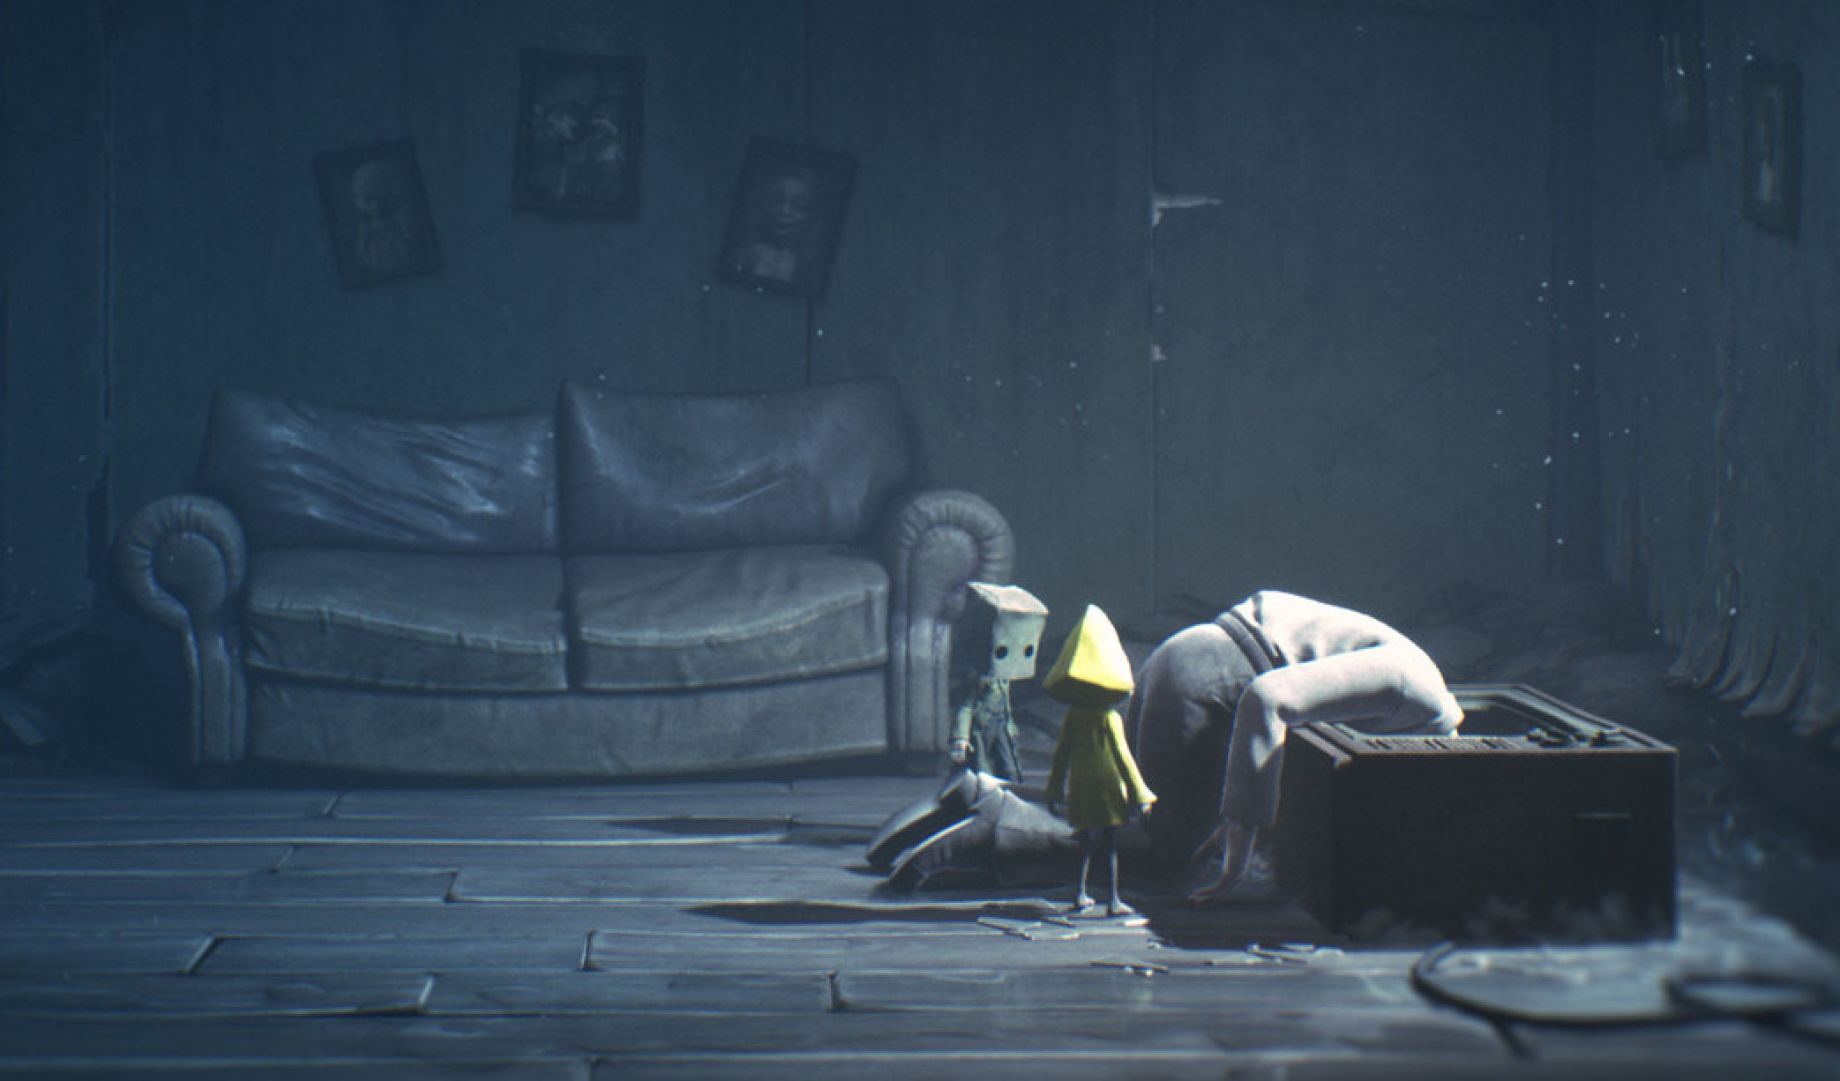 Little Nightmares 3 Announced From Dark Pictures Studio - PlayStation  LifeStyle